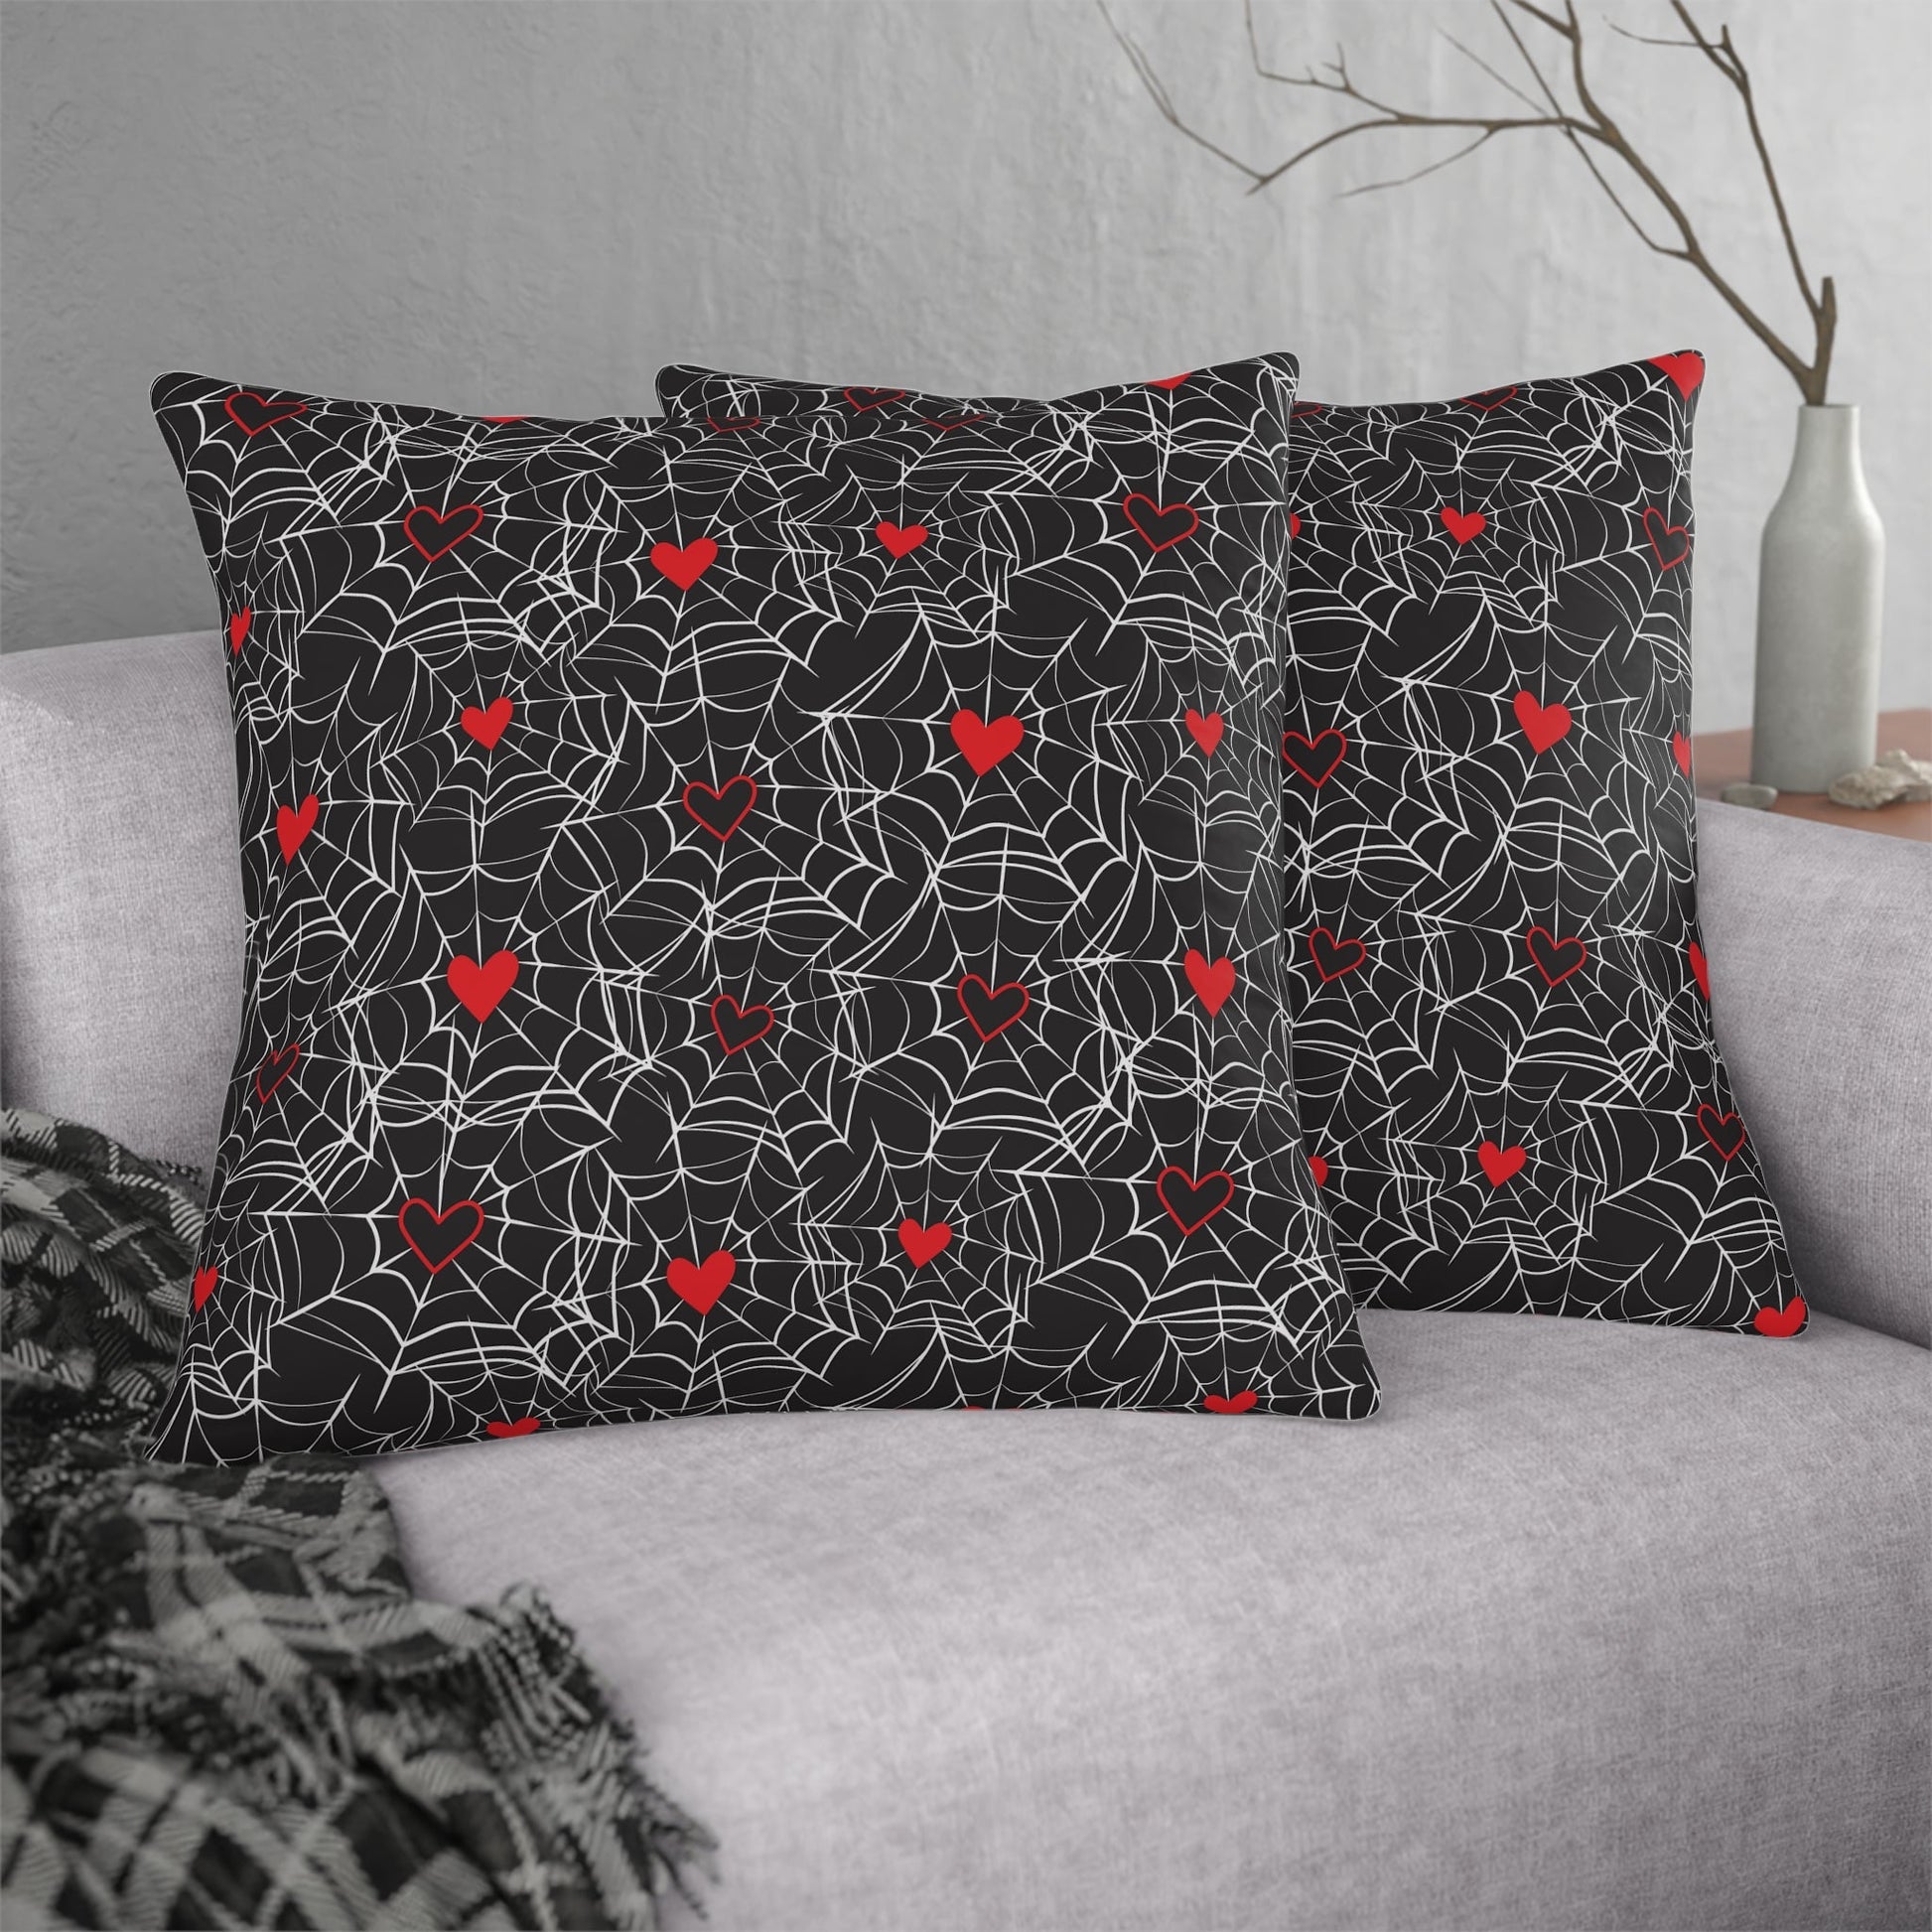 Home Decor - Spider Web Hearts Waterproof Pillows